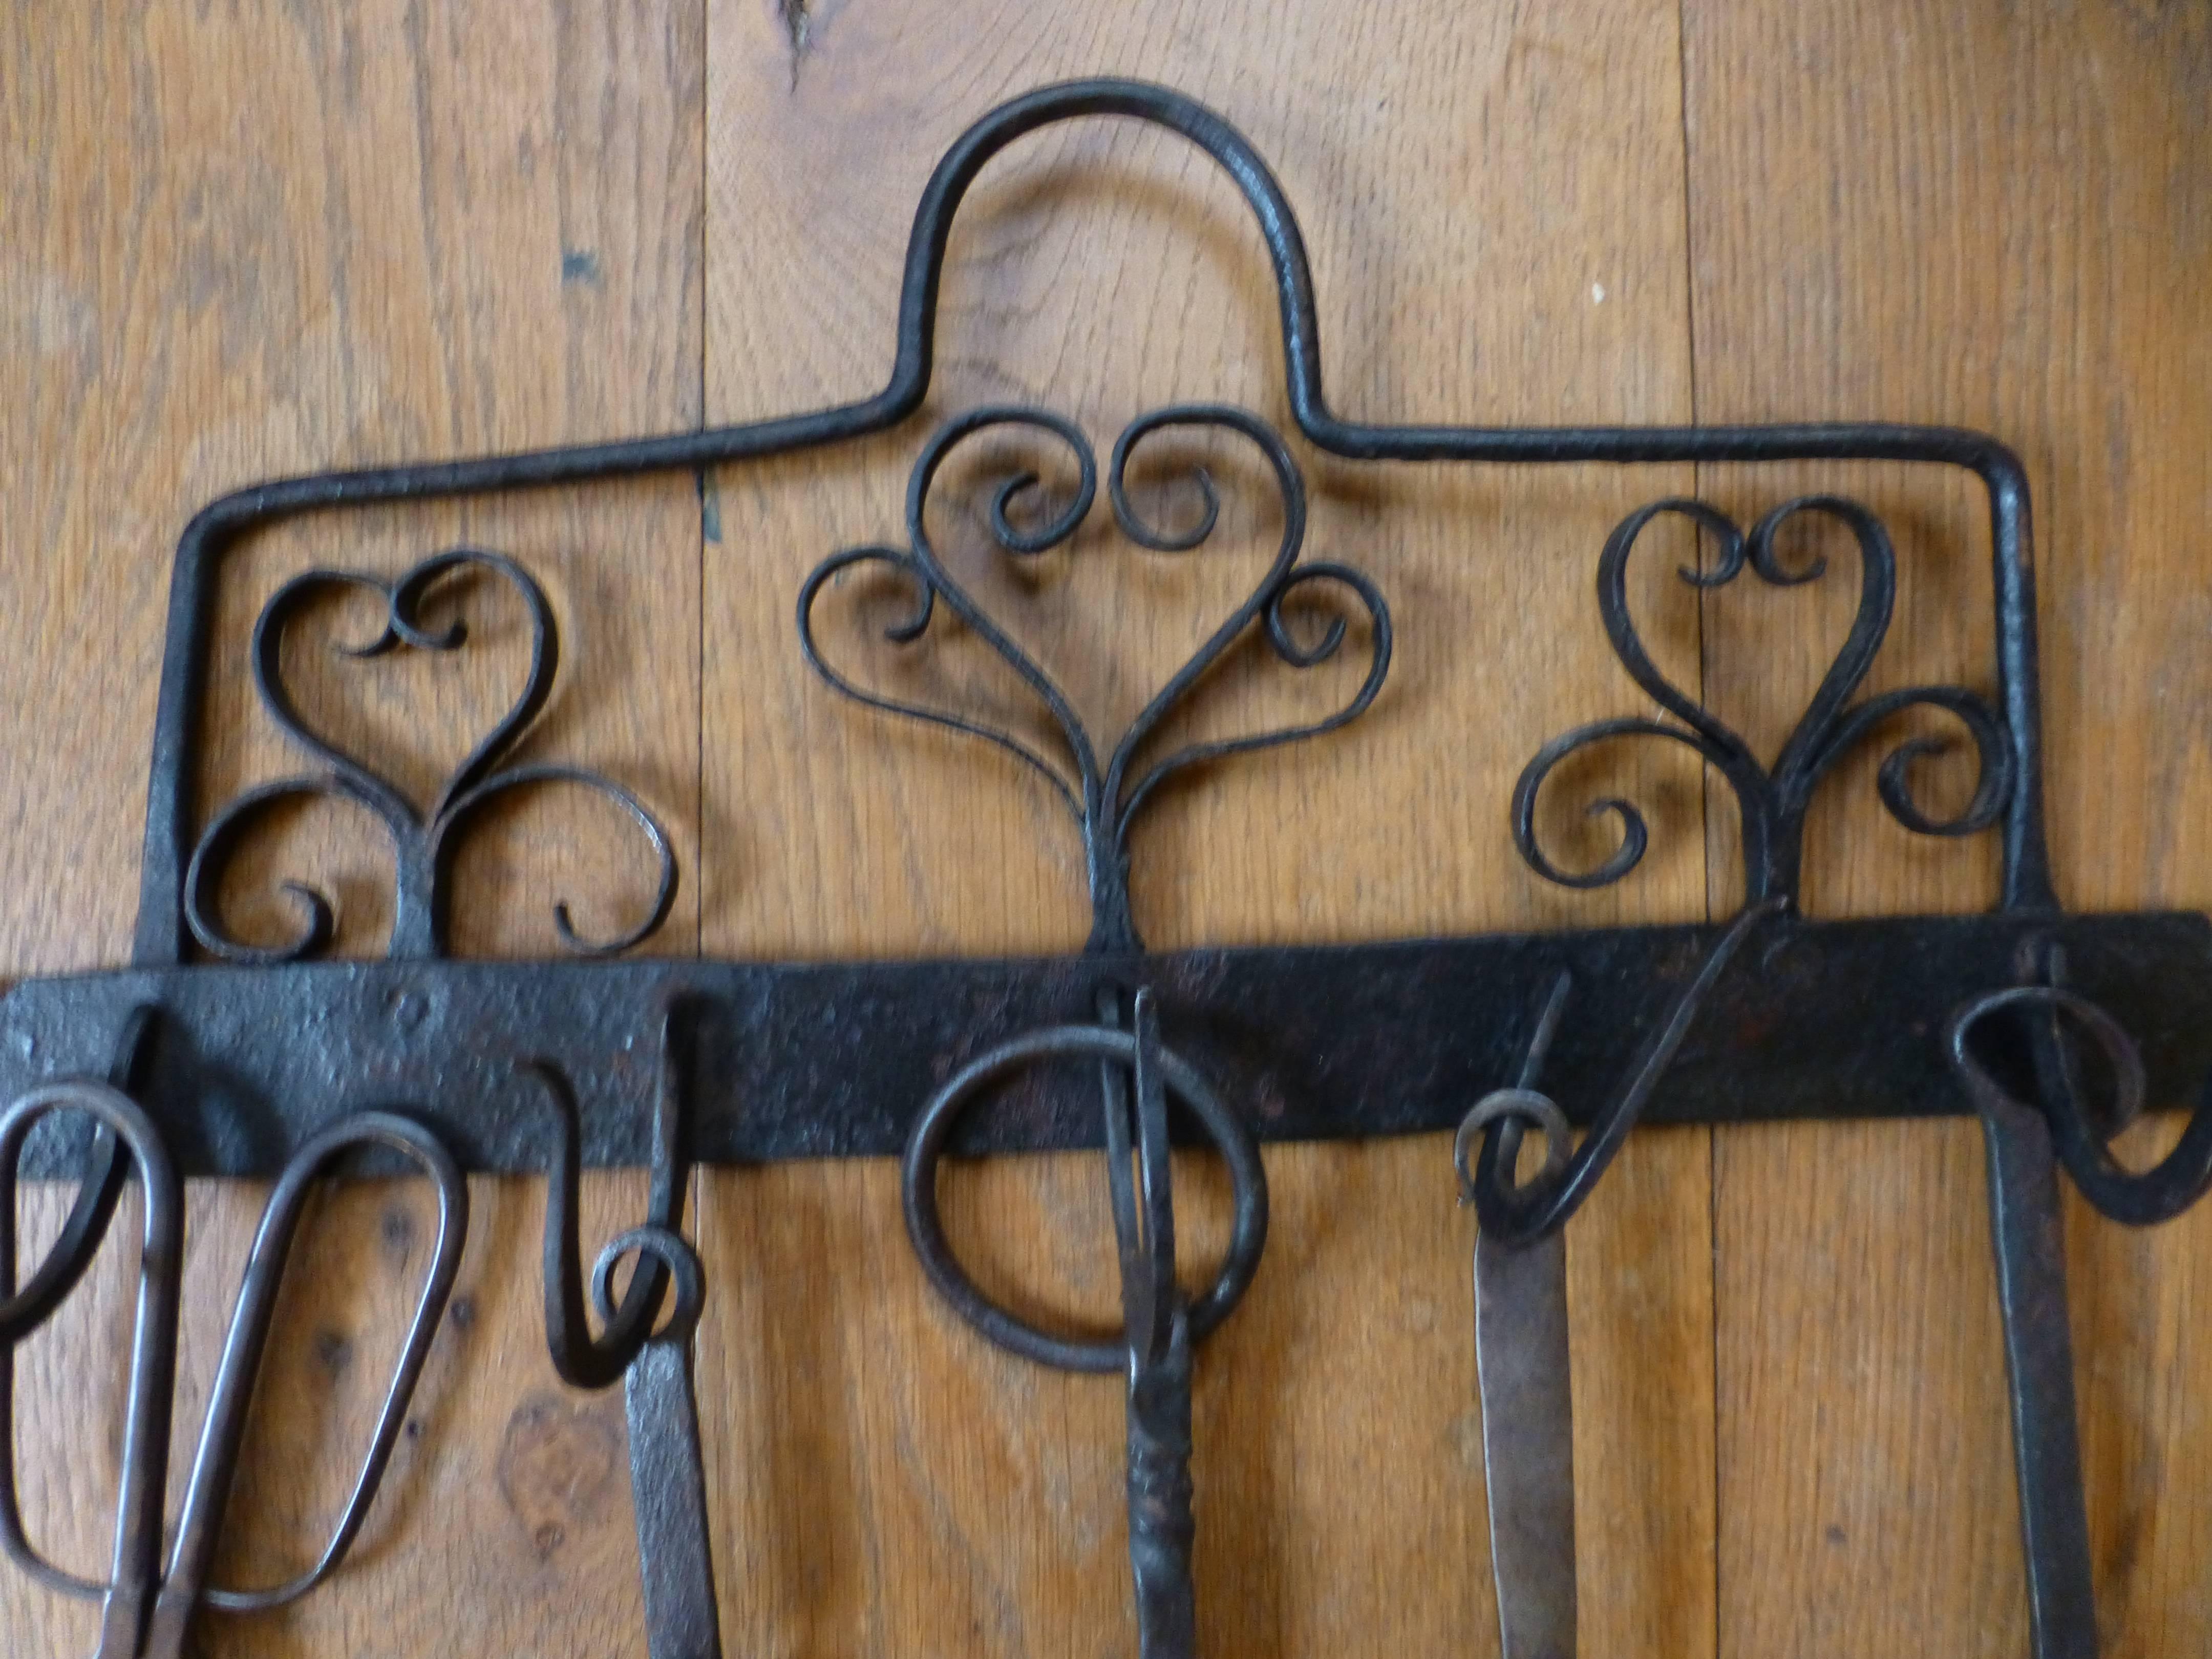 Set of 18th-19th century fireplace tools used for tasting and turning food that is cooked on an open fire. The hanger and the five tools are made of wrought iron.

We have a unique and specialized collection of antique and used fireplace accessories